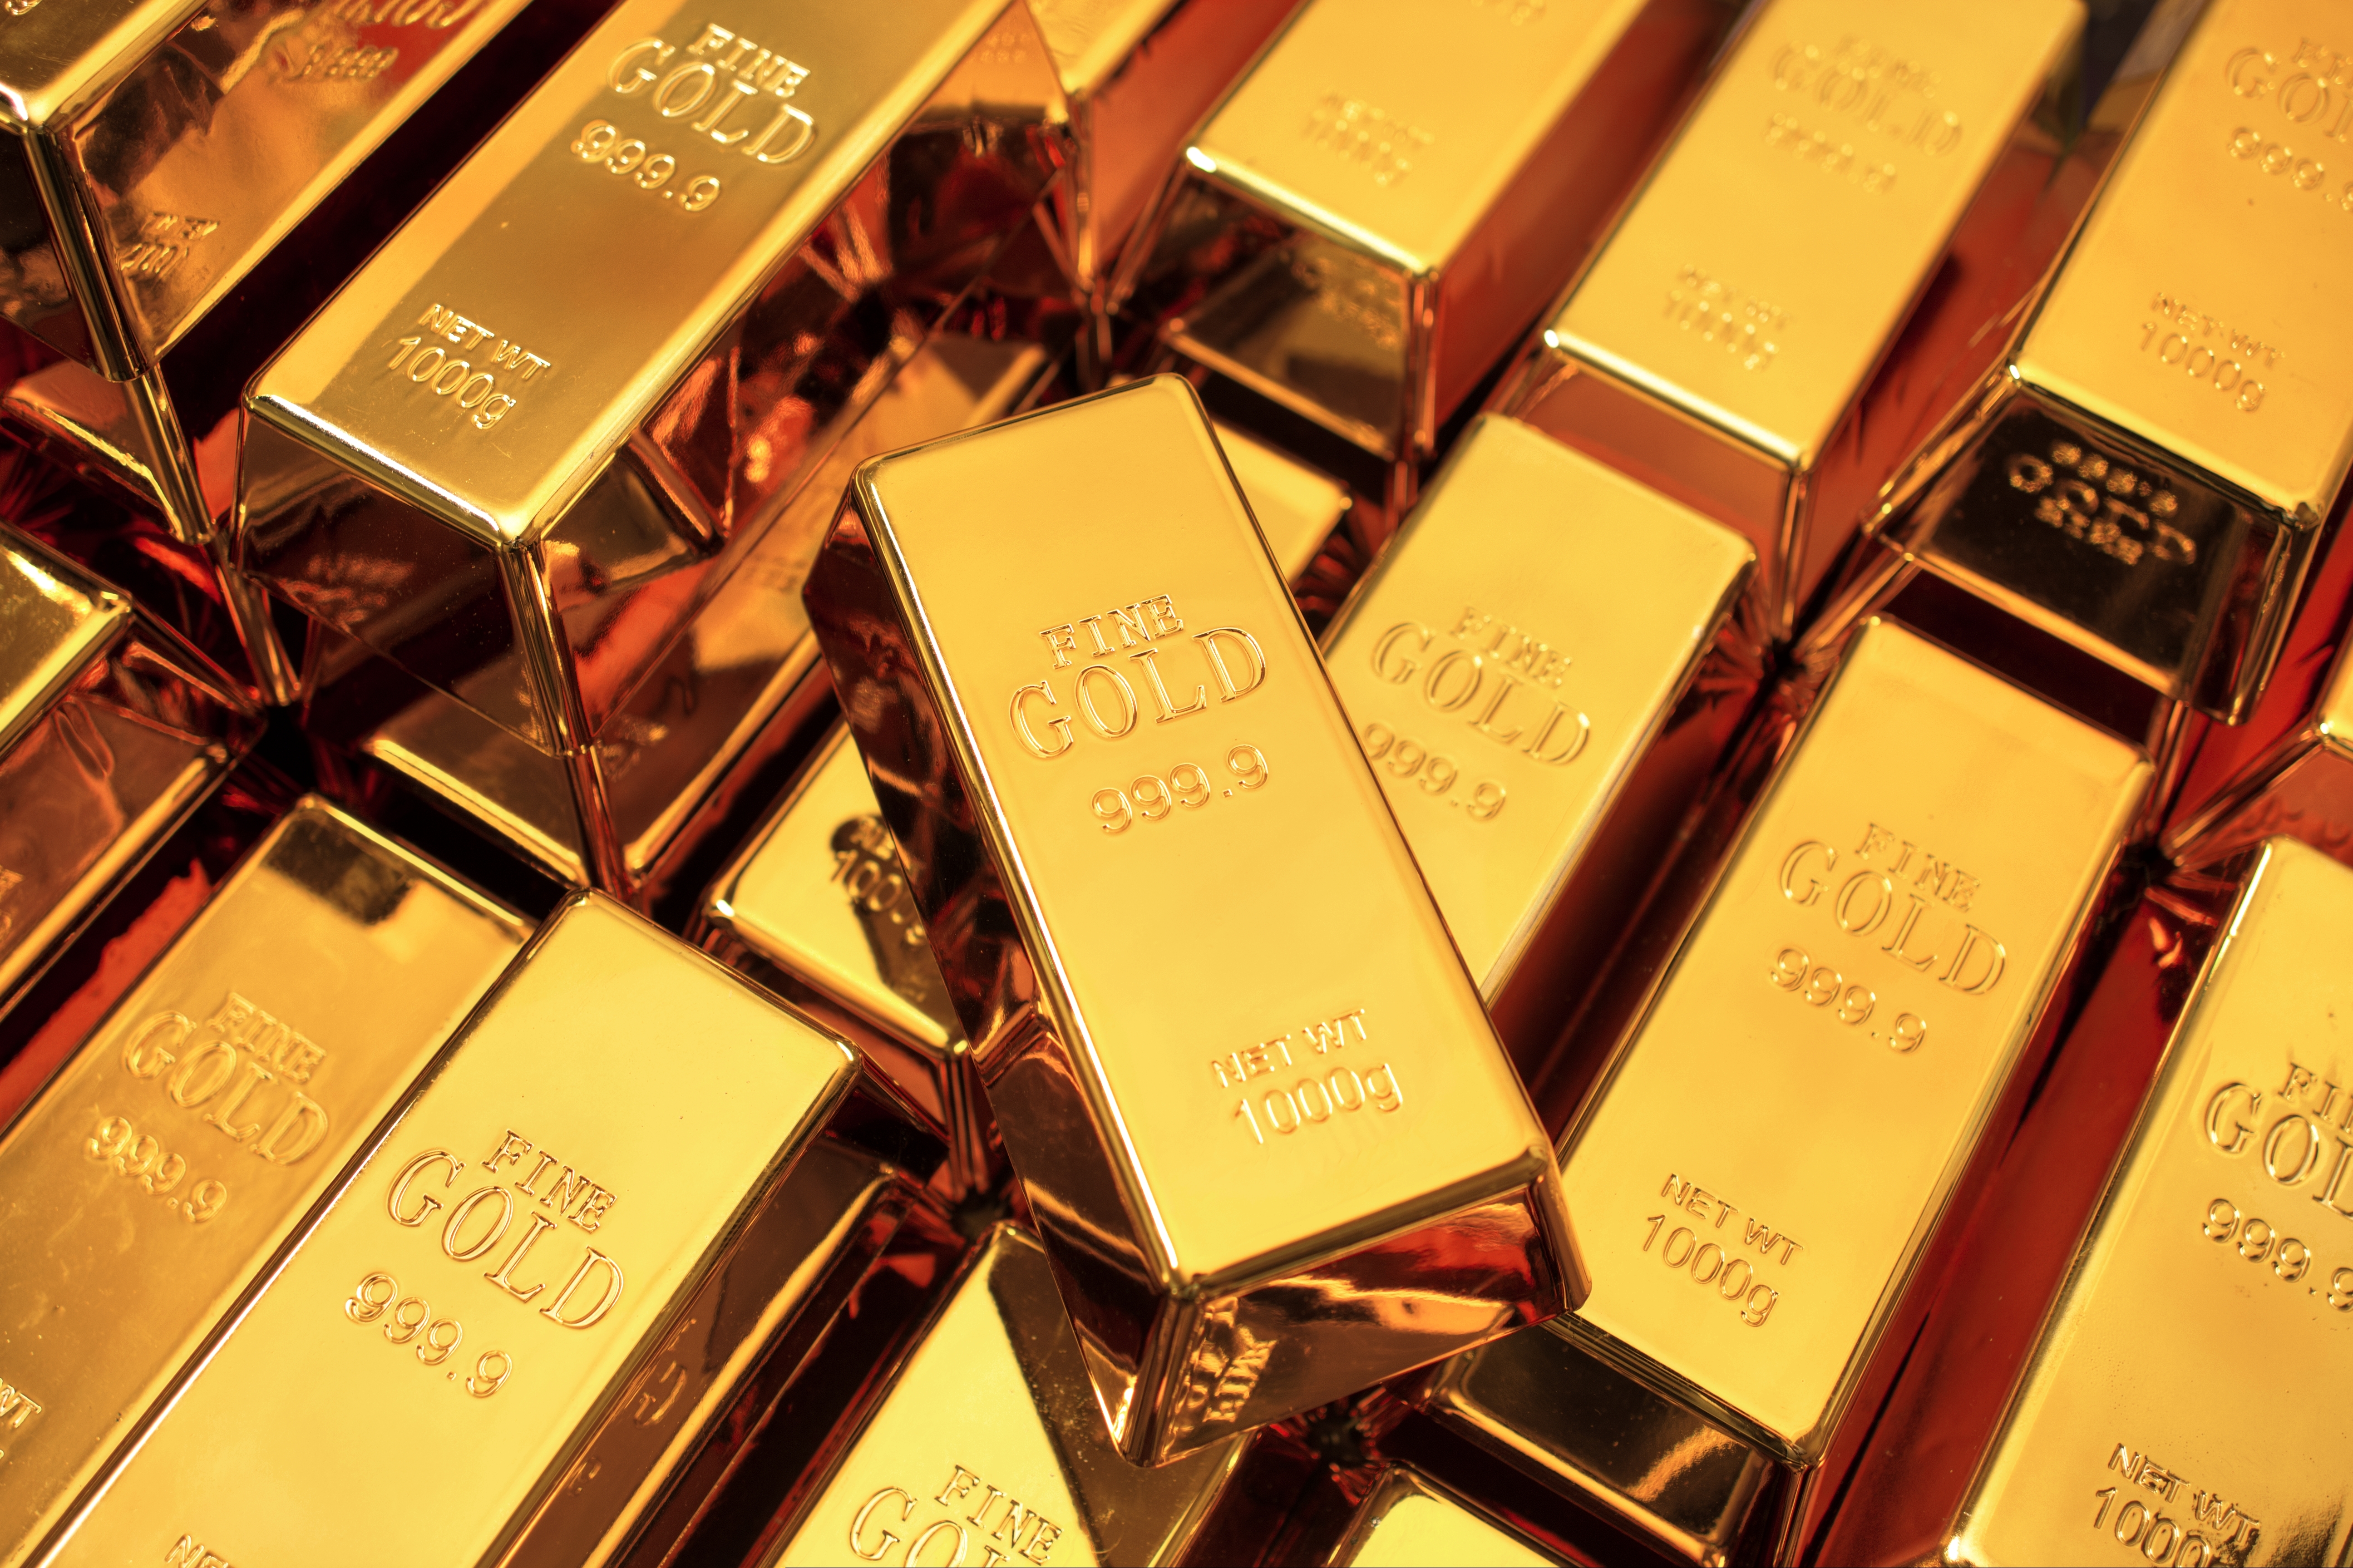 Many Gold bars. | Source: Shutterstock